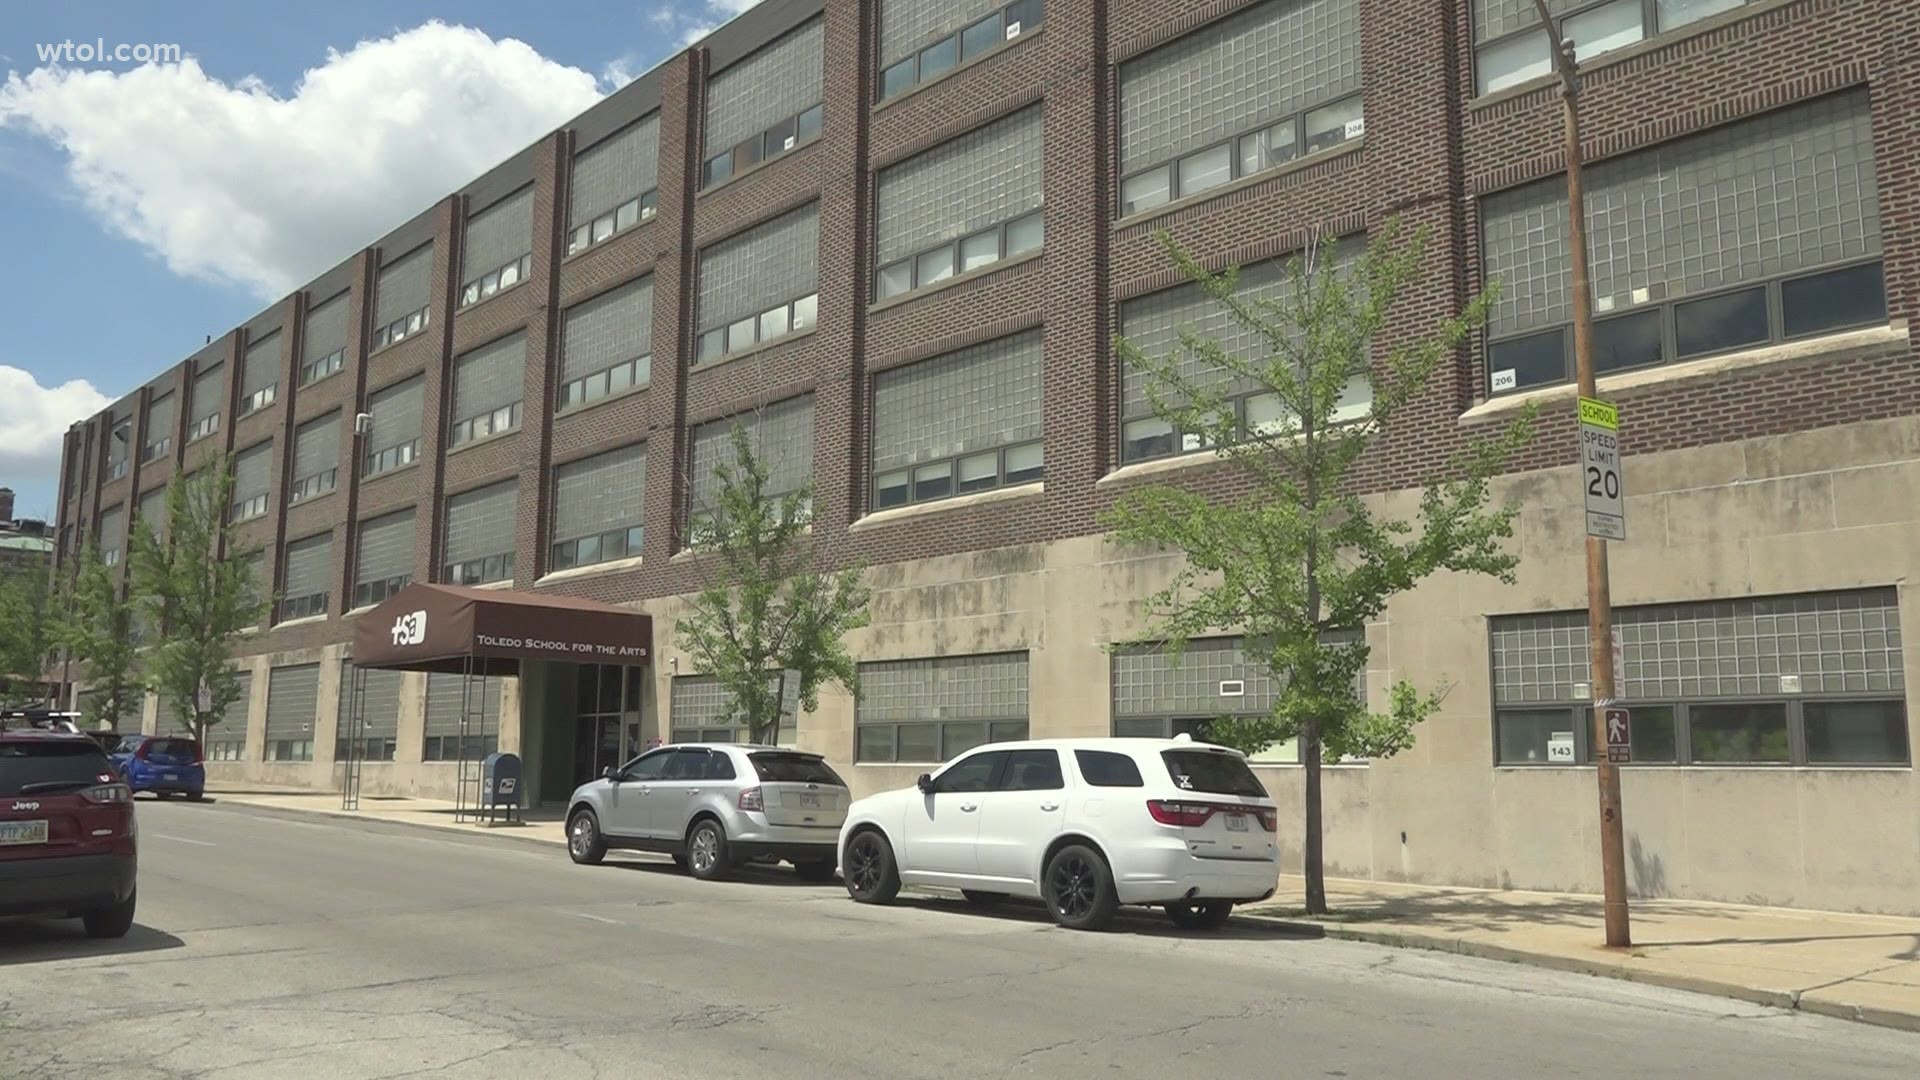 Most years, Toledo School for the Arts has a waitlist for every grade, but this year is different. The school has around 20 open spots for the upcoming school year.